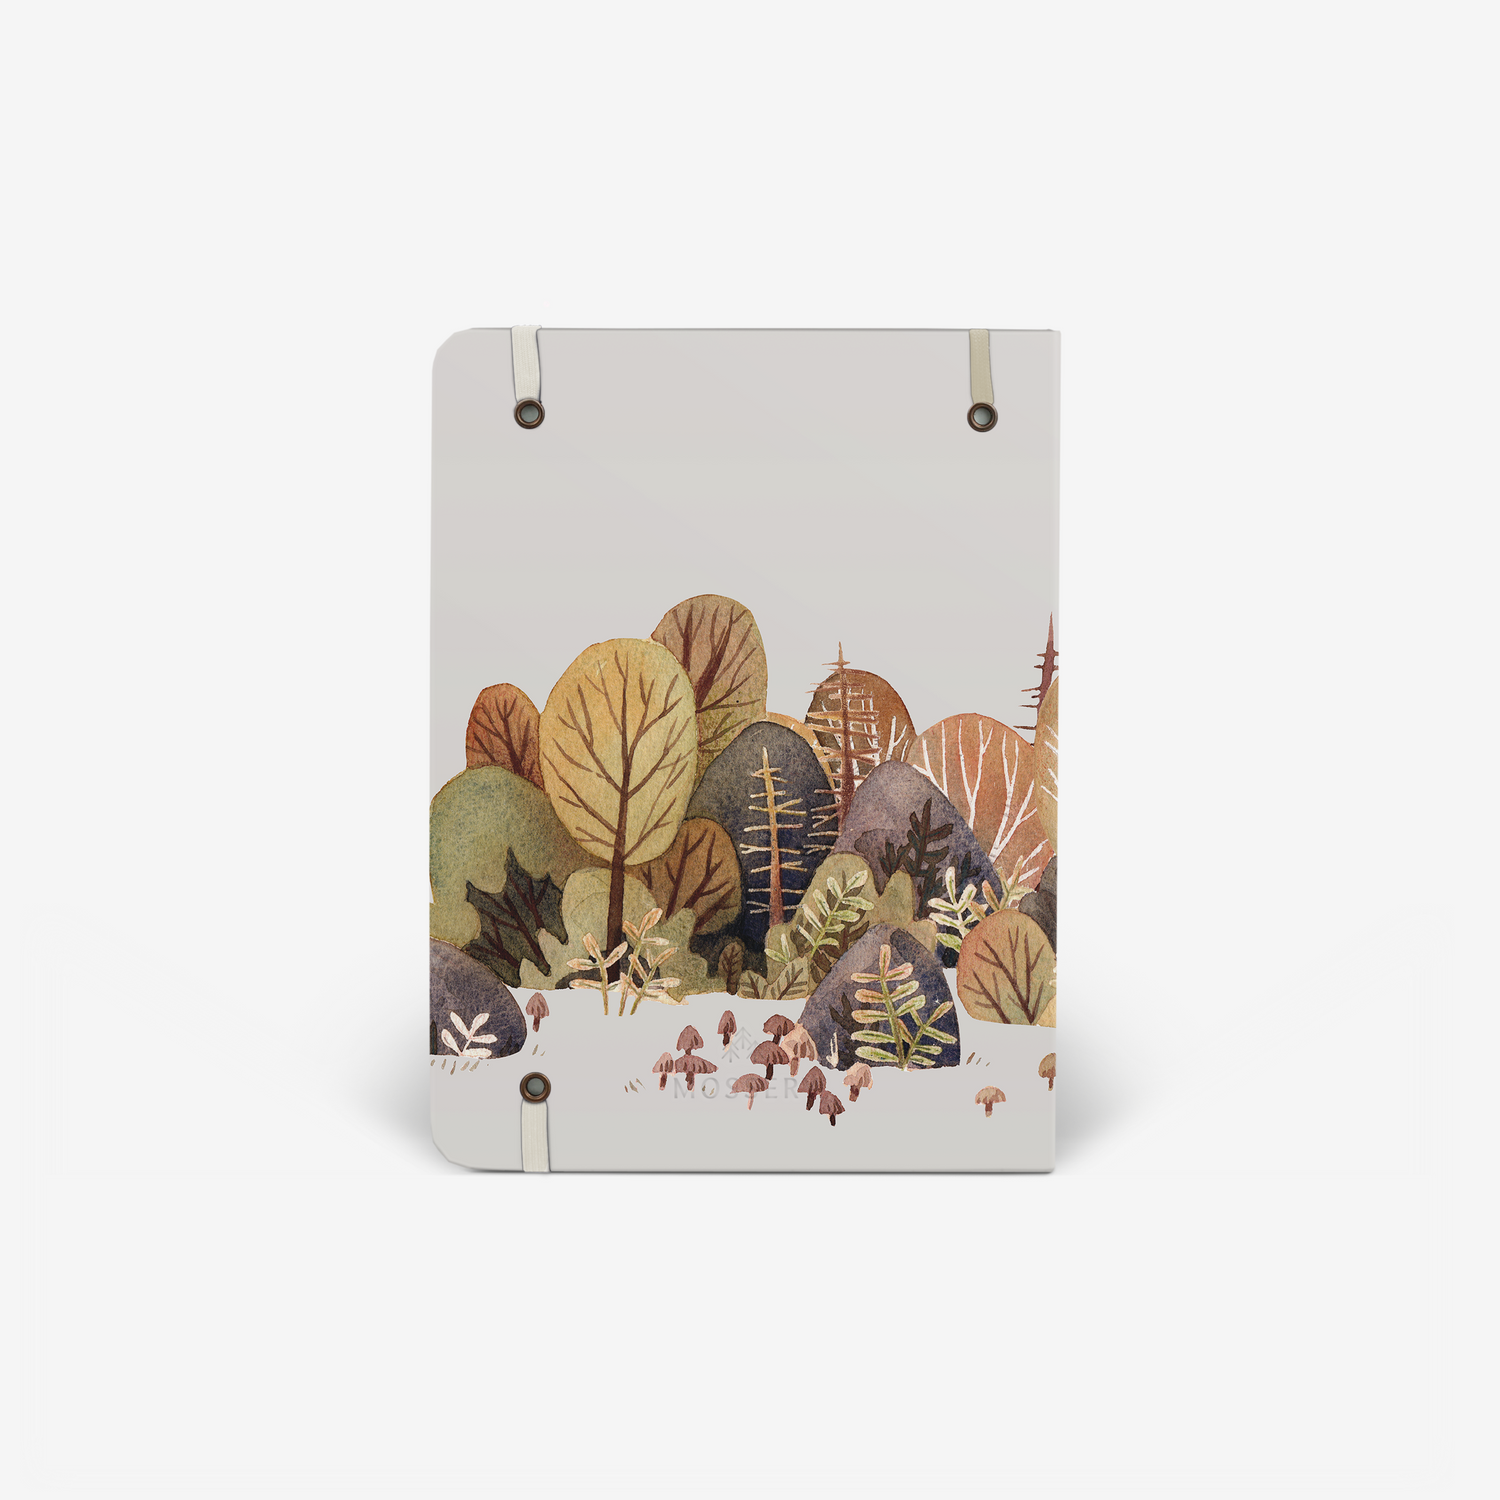 Birch Forest Light Cover